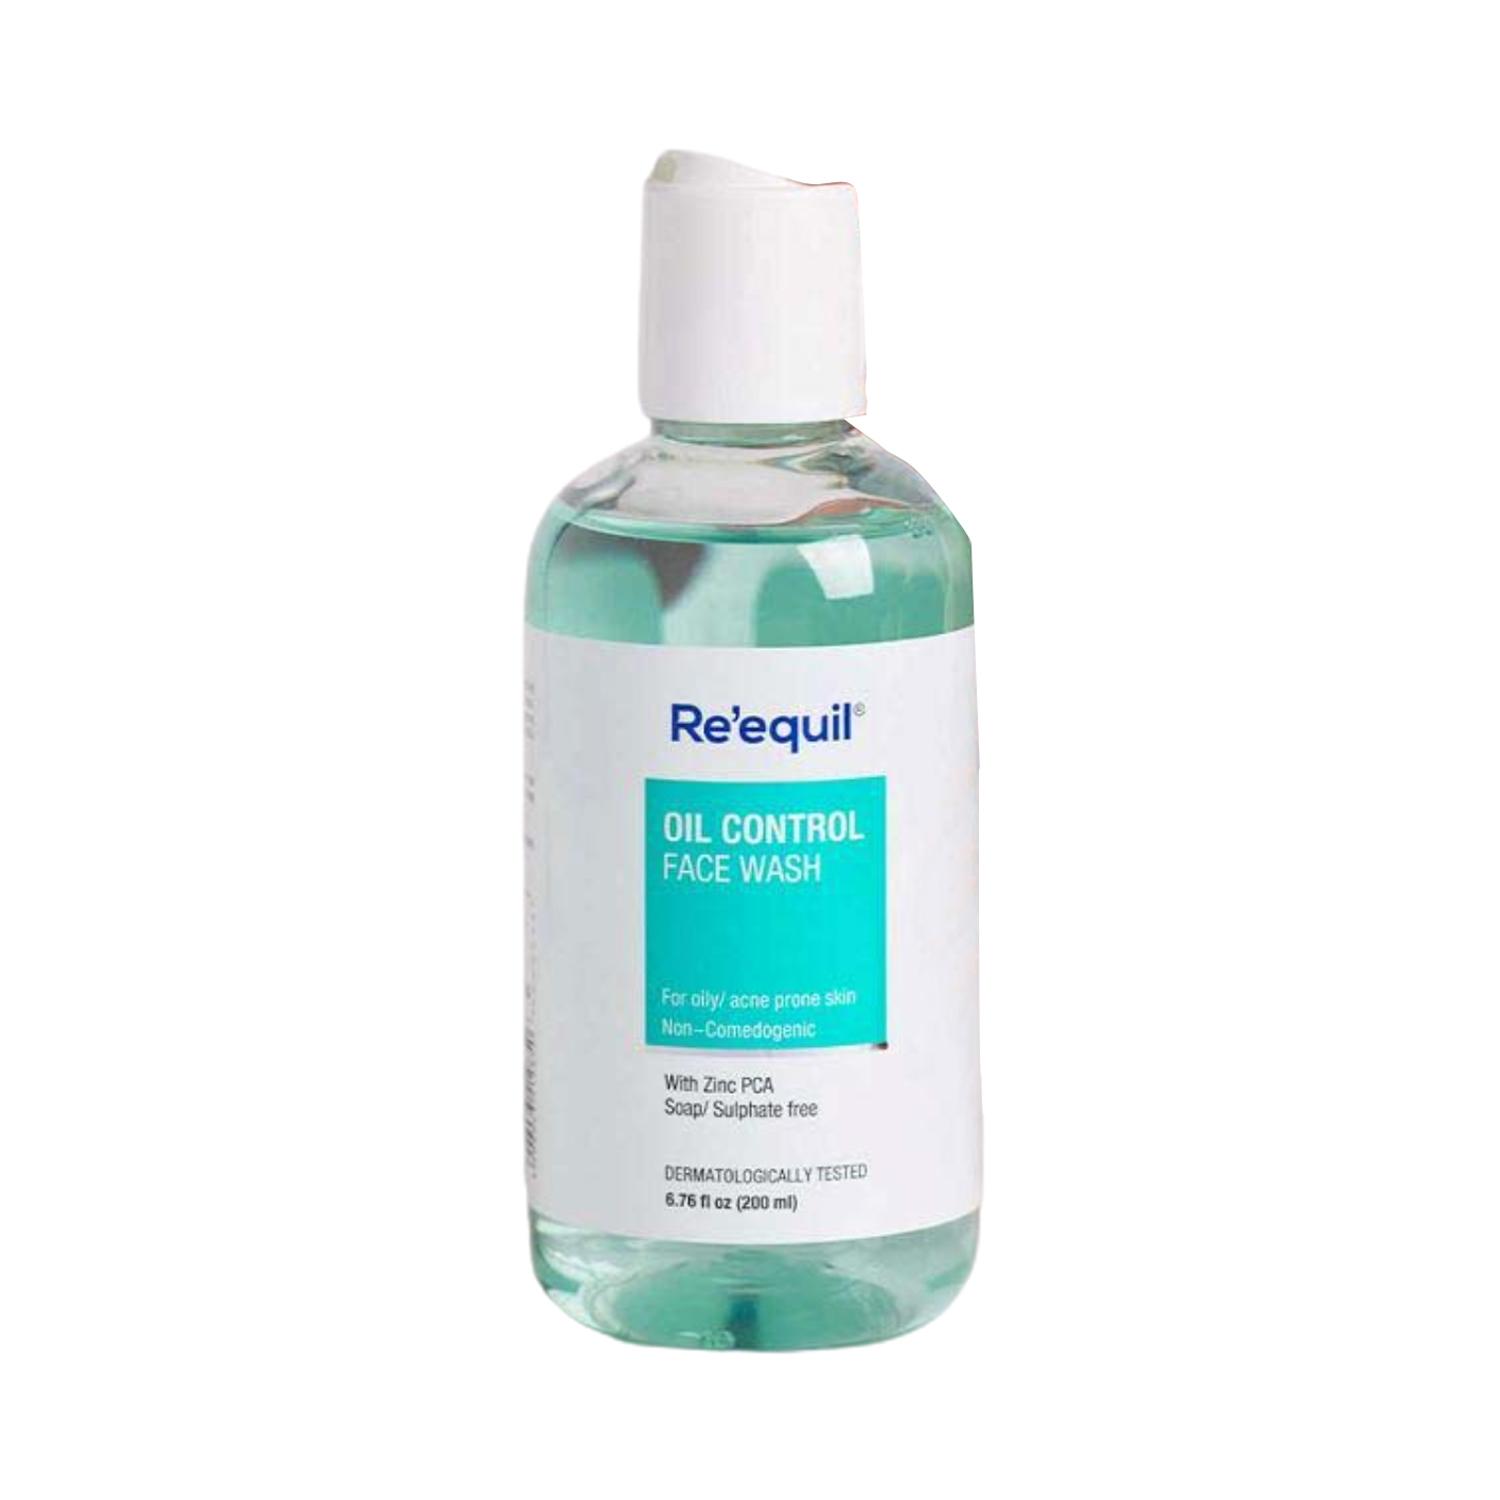 re'equil oil control face wash (200ml)